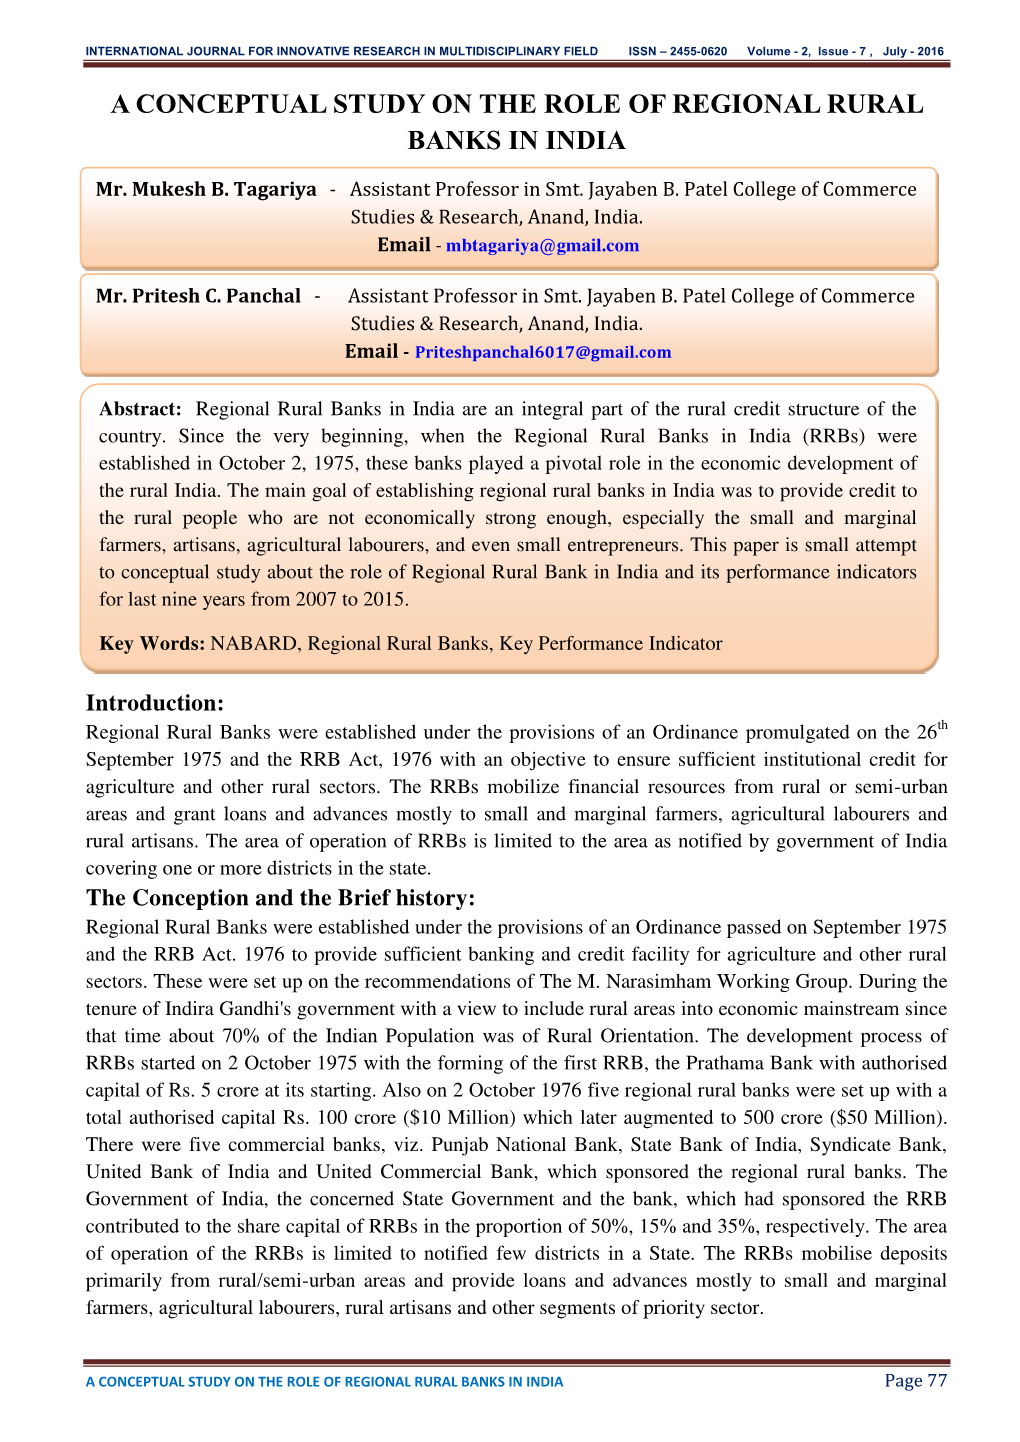 A Conceptual Study on the Role of Regional Rural Banks in India